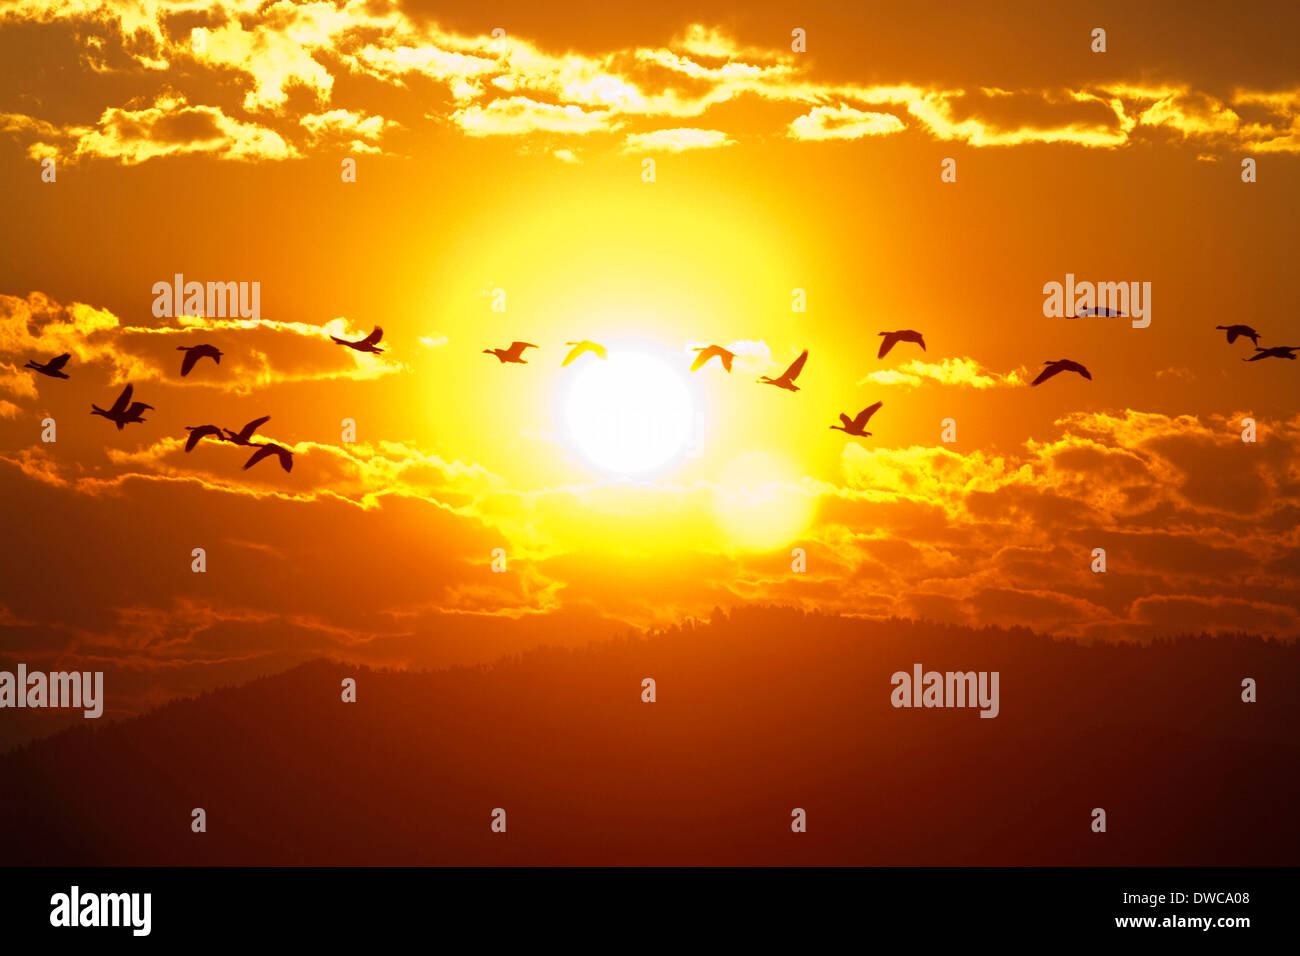 A flock of geese fly at sunrise in Boise, Idaho, USA. Stock Photo